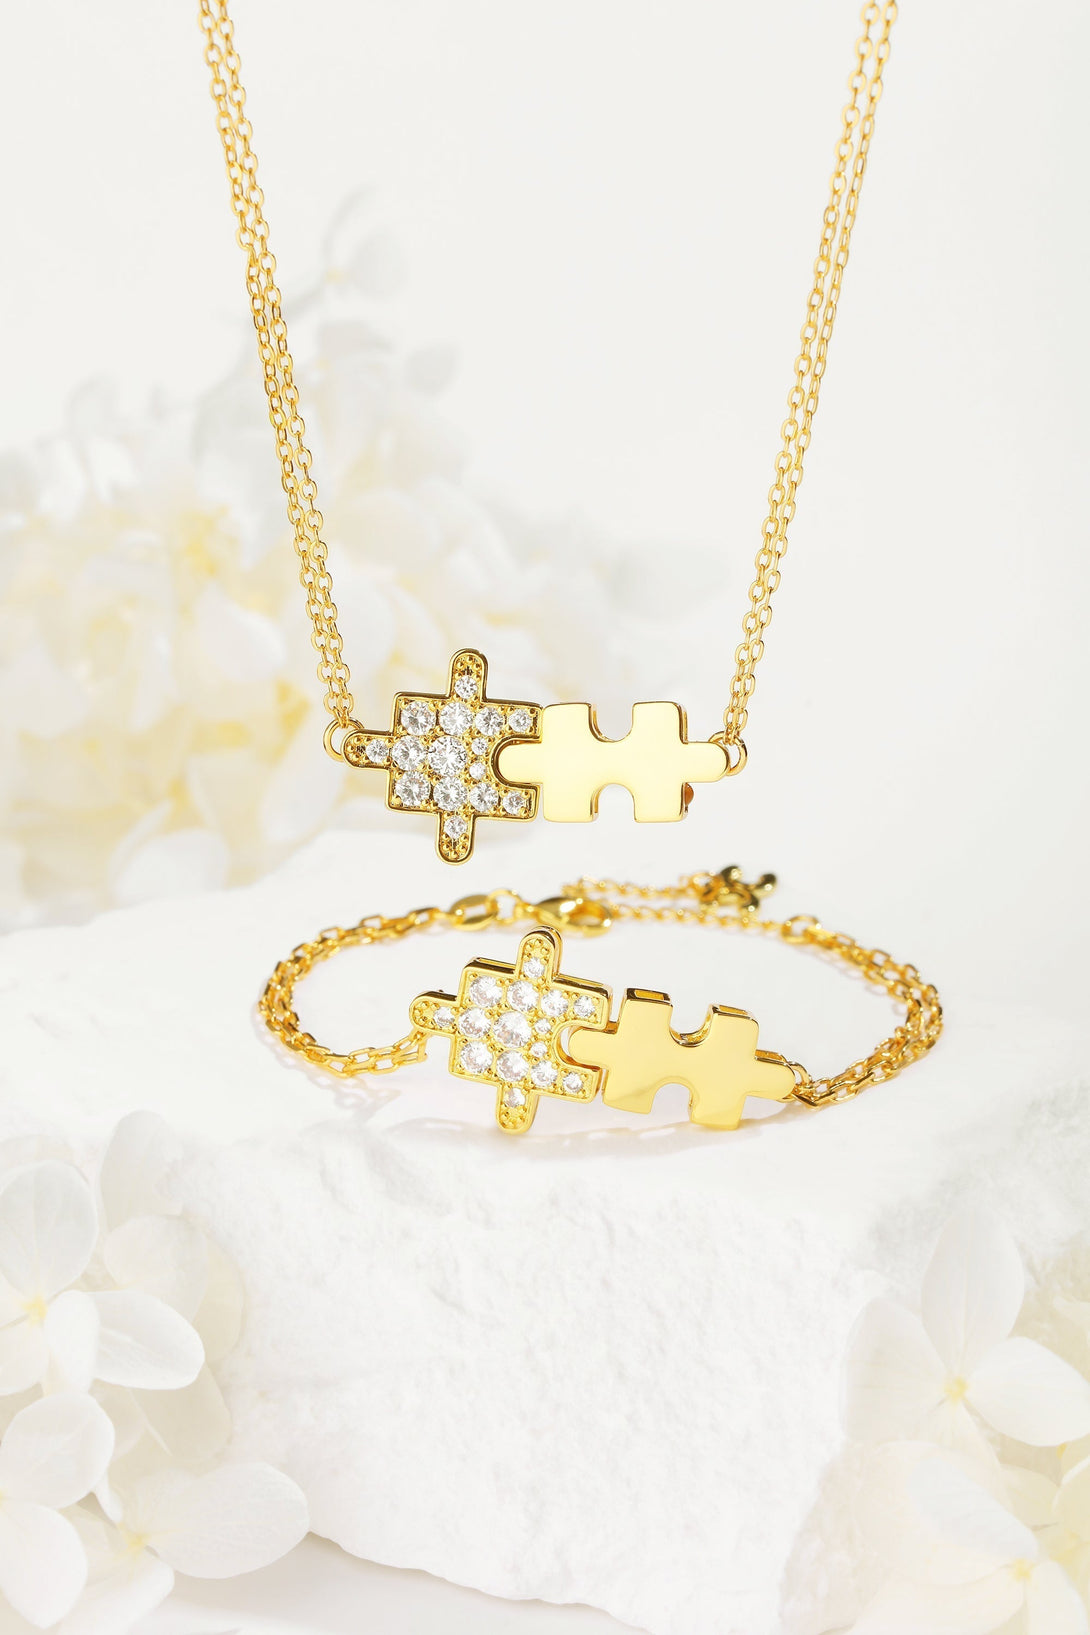 Gold Jigsaw Puzzle Necklace and Earrings Set - Classicharms